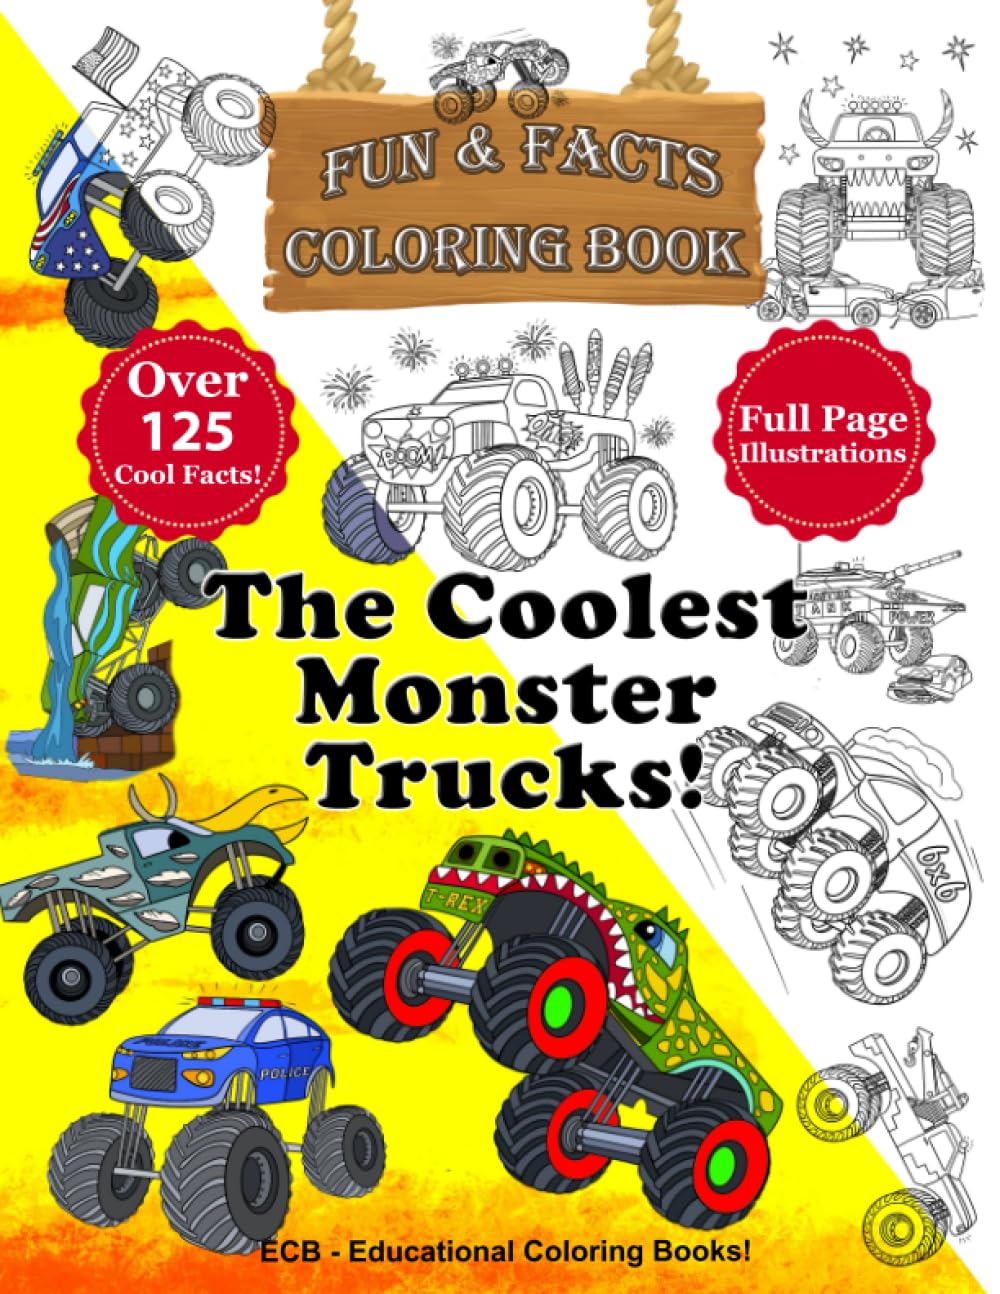 The Coolest Monster Trucks in the World!: Fun & Facts Coloring Book - Full page original illustrations and over 125 cool facts! (We Can Color! – Fun & Facts Educational Coloring Books)